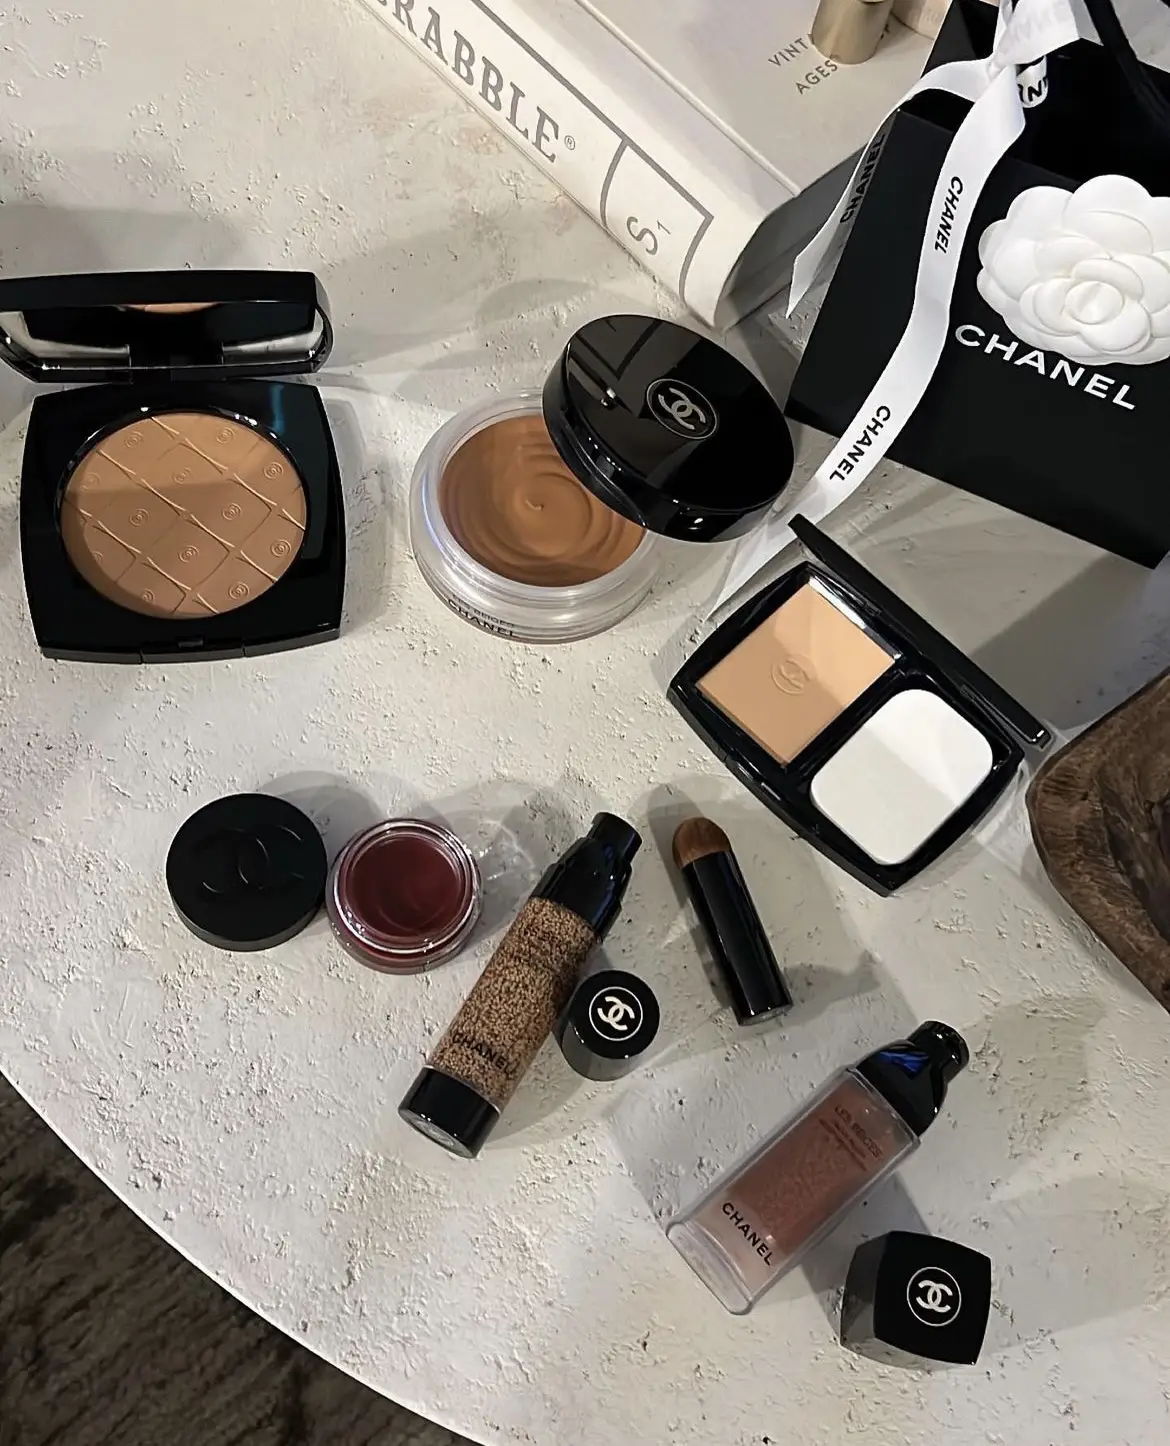 Favorite Chanel beauty products